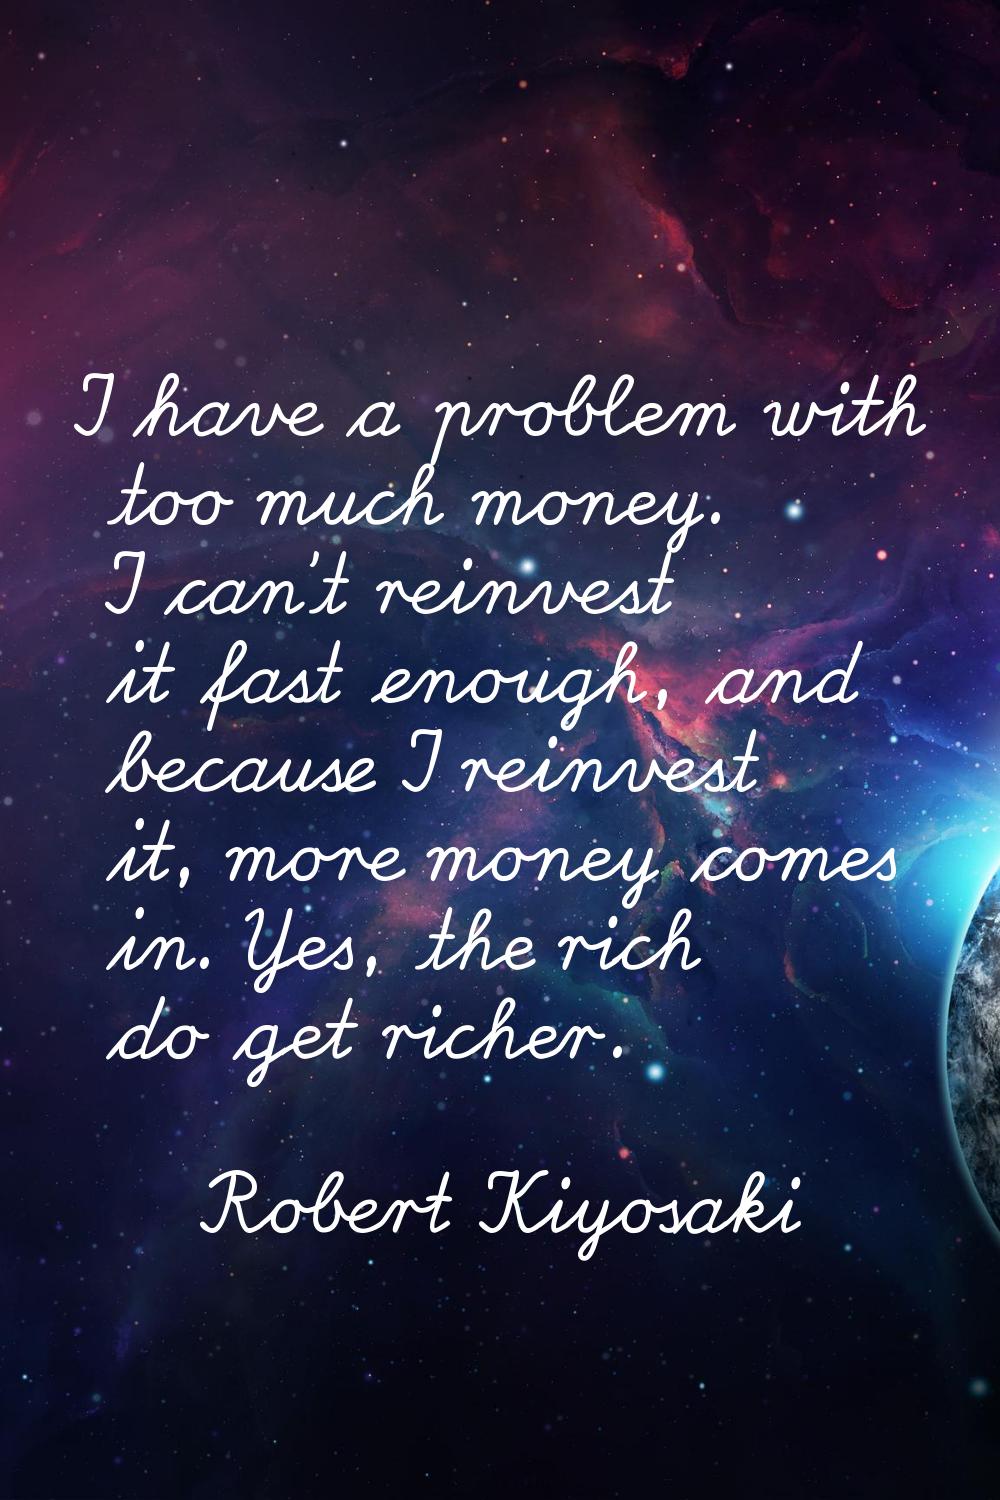 I have a problem with too much money. I can't reinvest it fast enough, and because I reinvest it, m